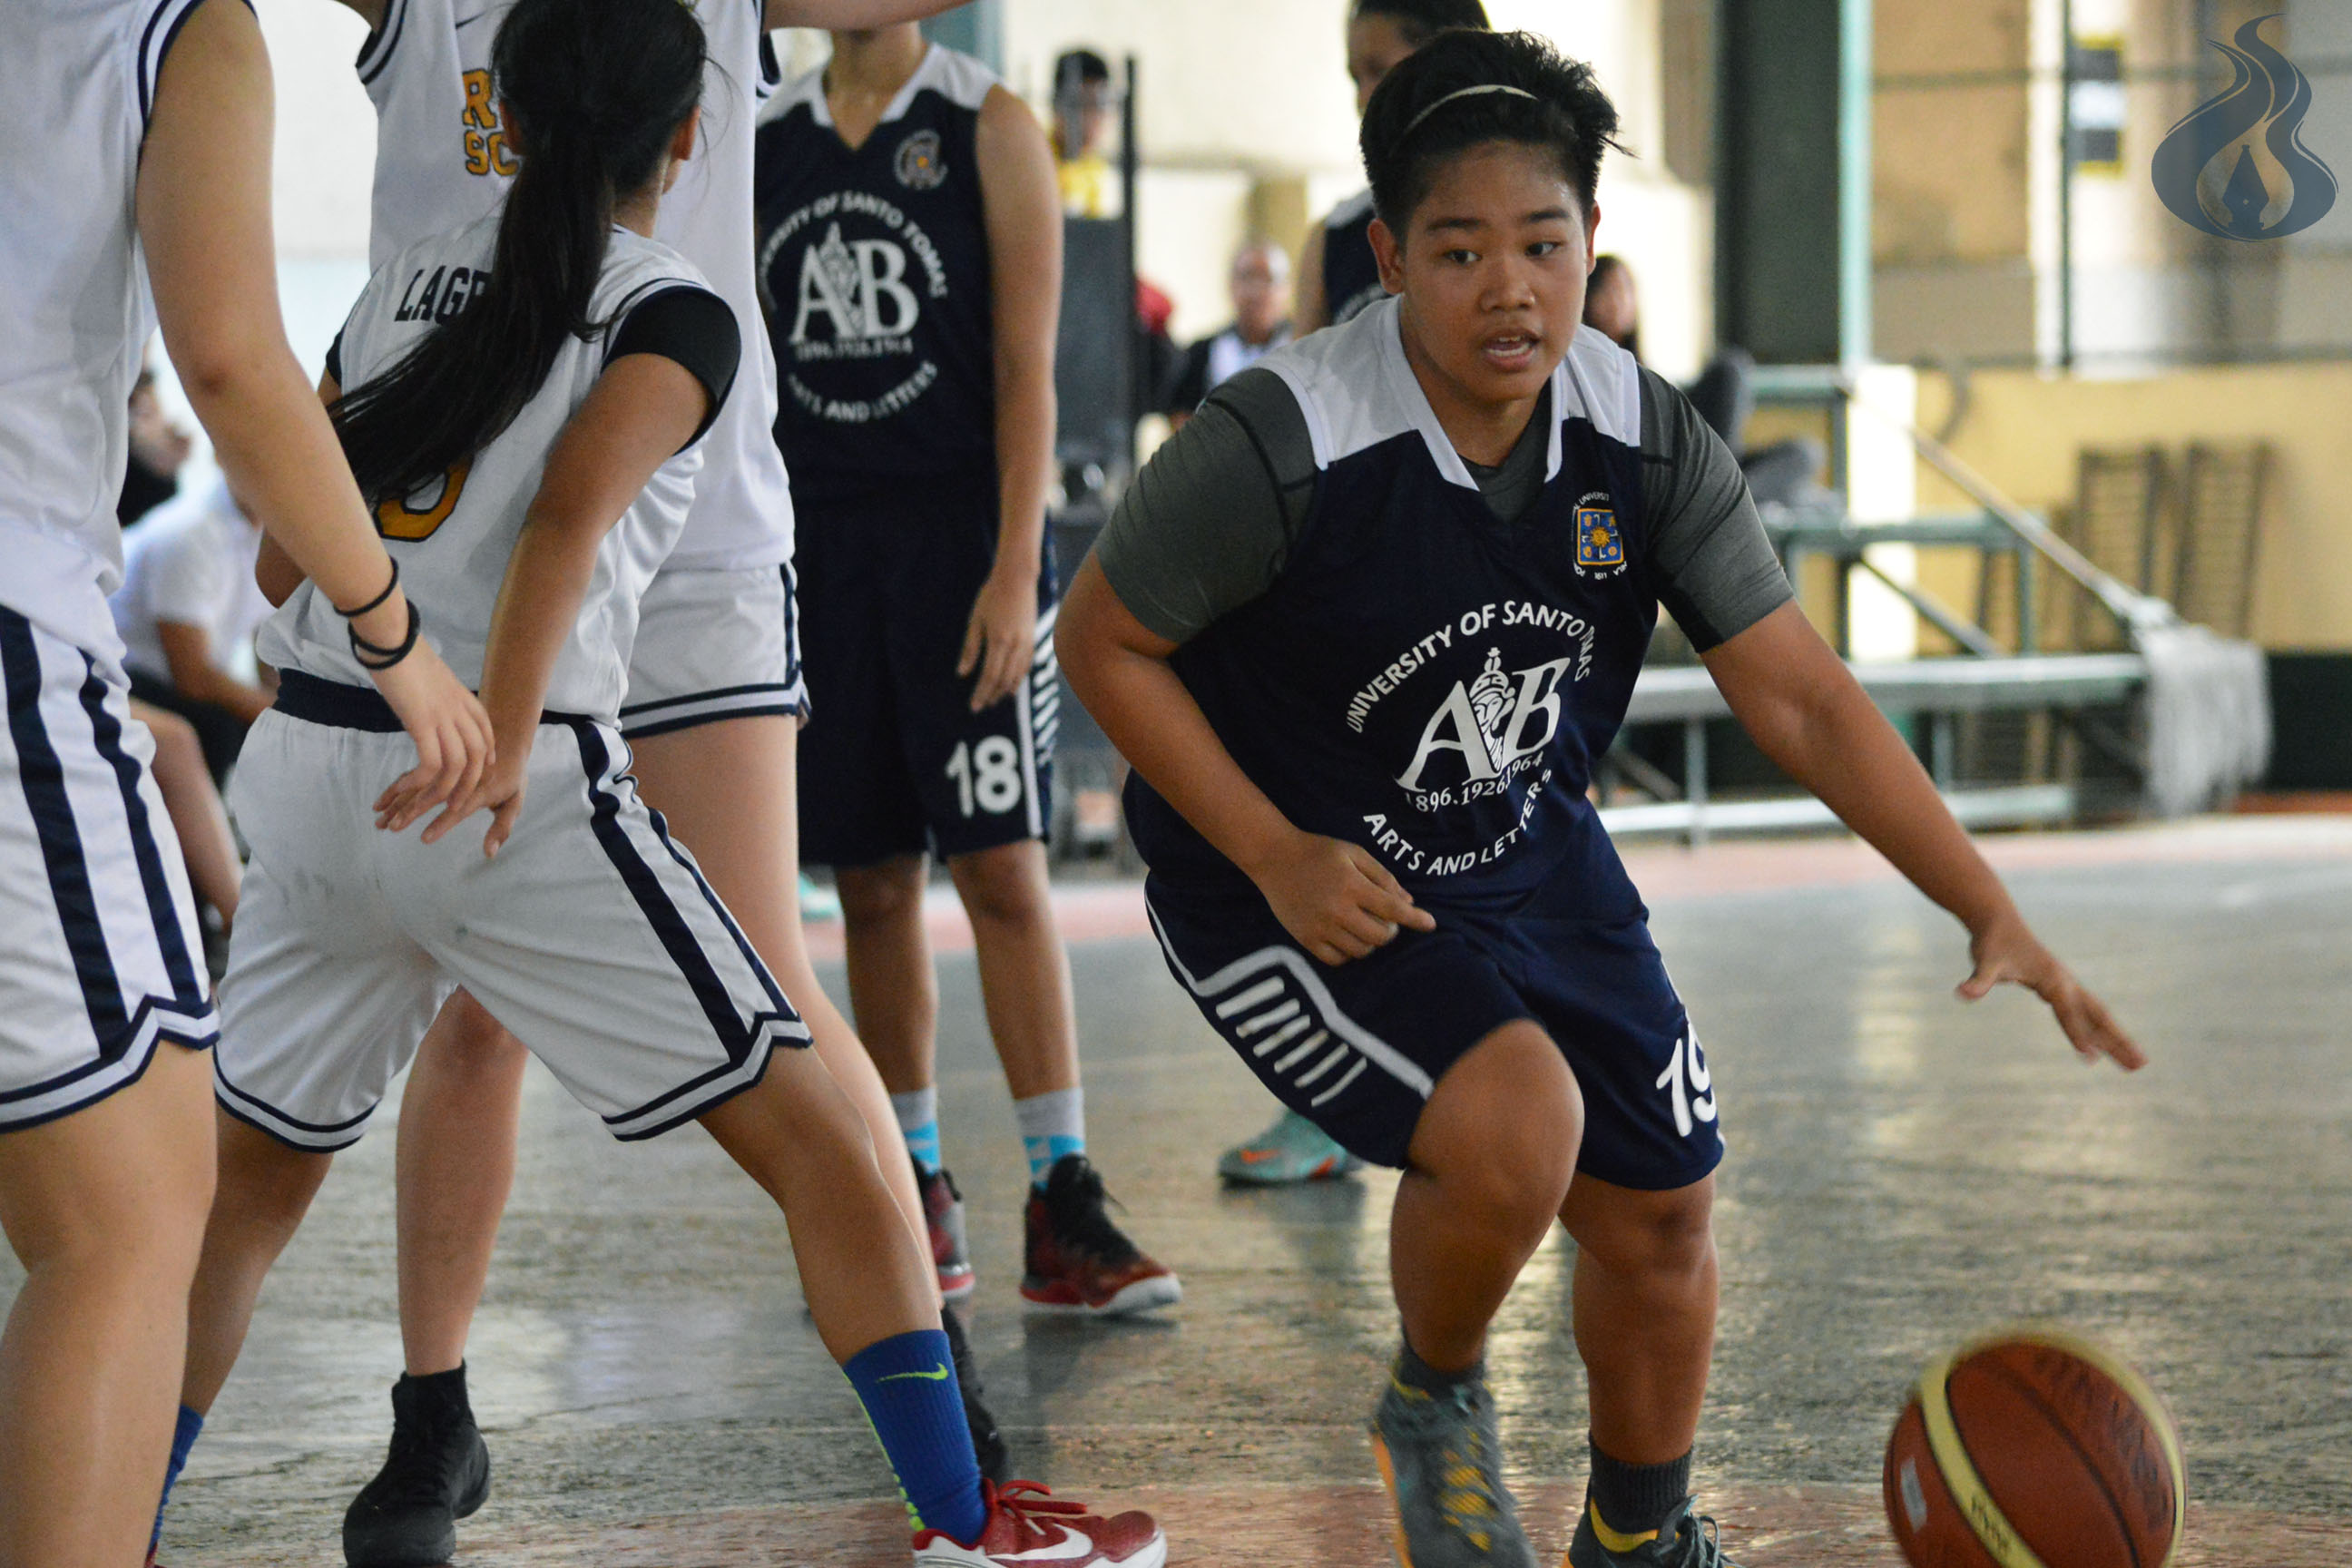 AB's star player Alaina Dimdam tries to penetrate CRS' defense. photo by JANINE C. PEREA